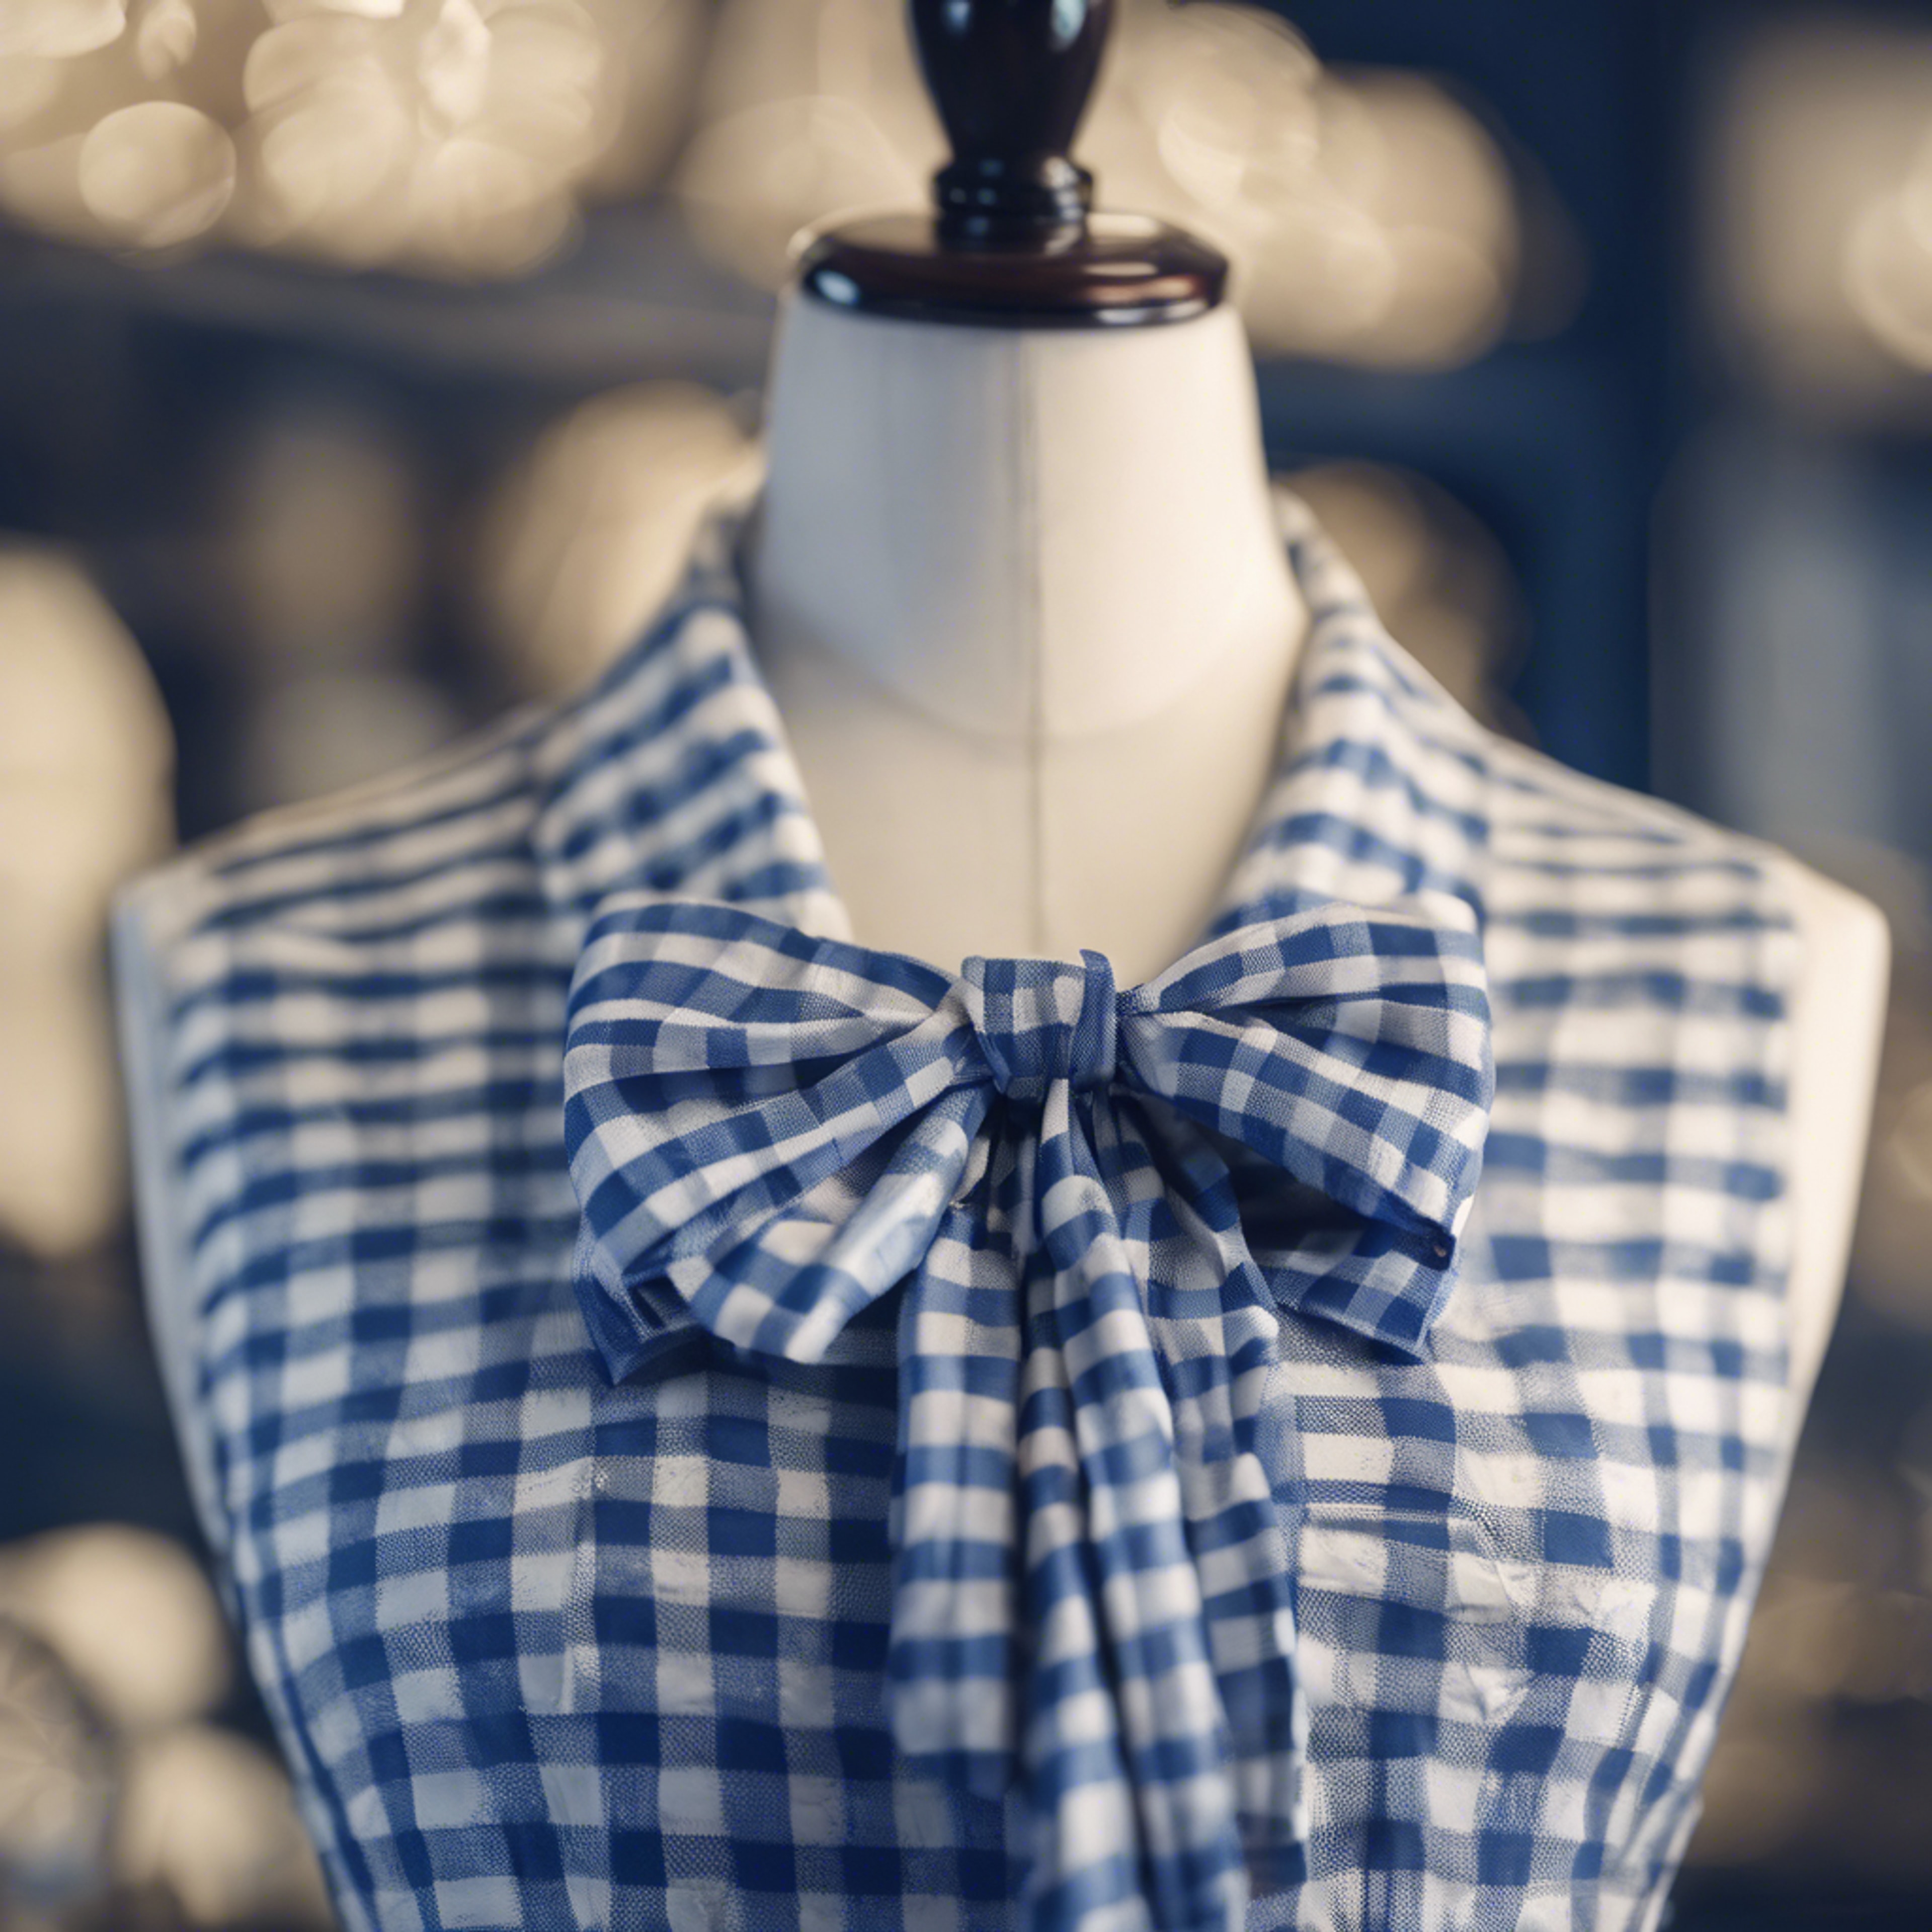 A preppy style blue and white chequered dress with a neatly tied bow on a mannequin.” Tapeta[2cff79e4d79d40c780d3]